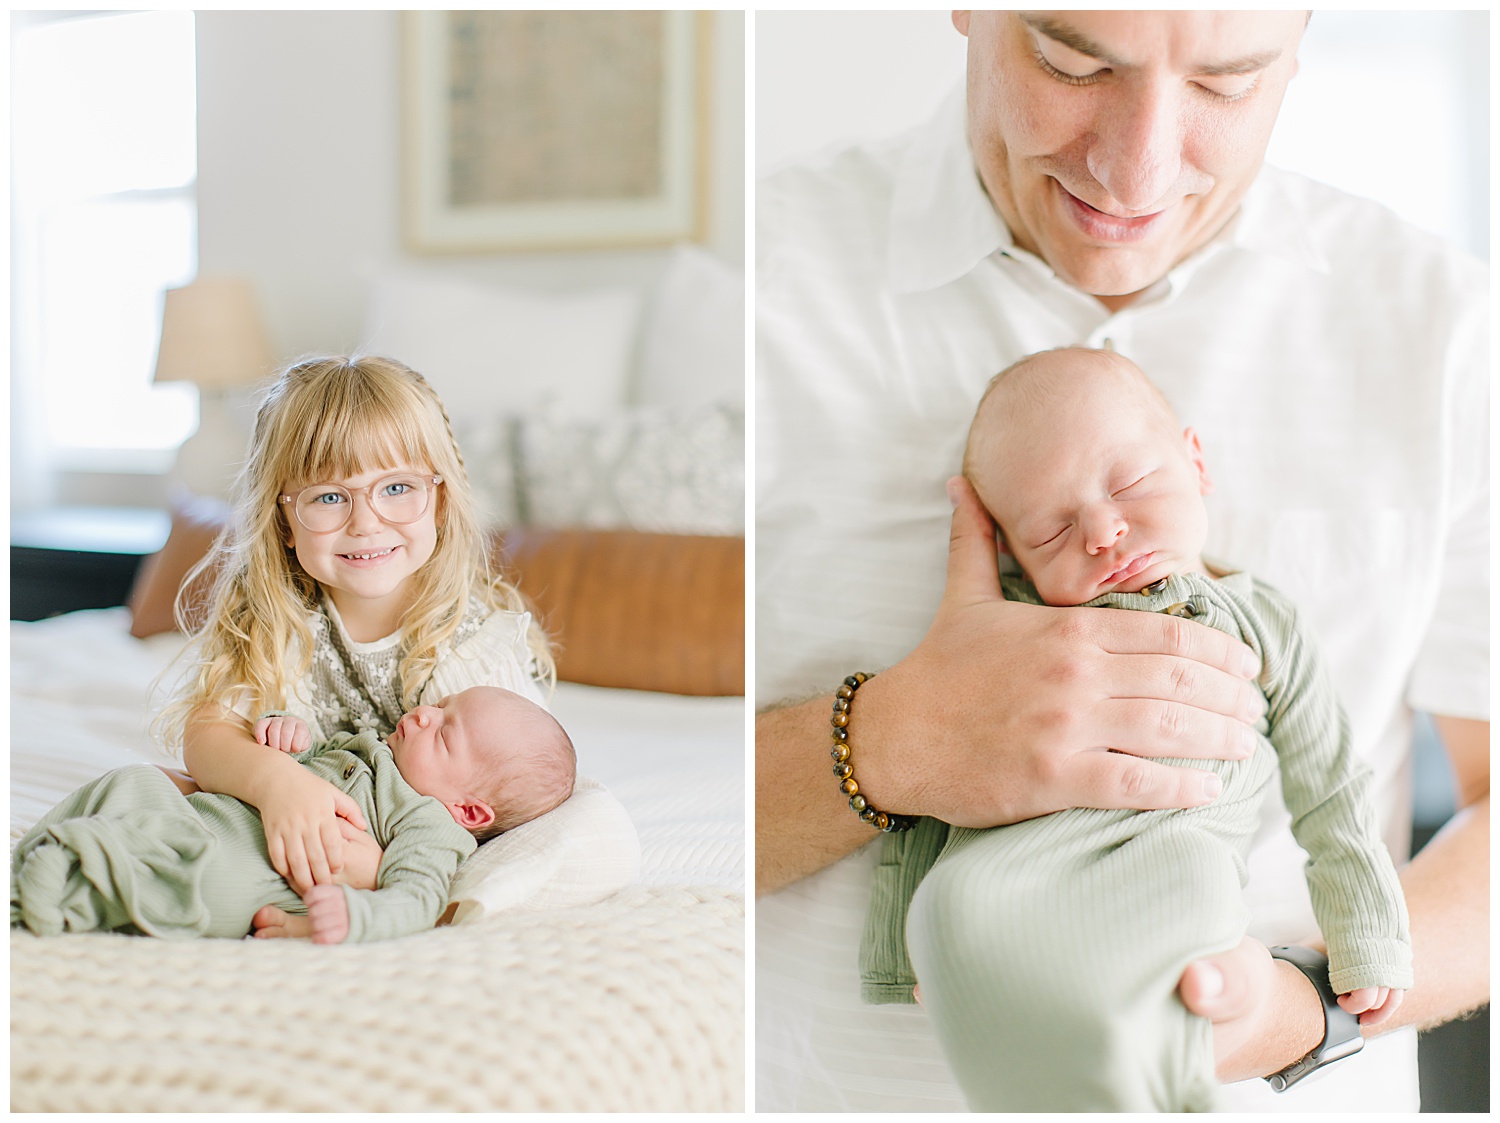 In-home newborn family pictures. Newborn picture with his dad. Newborn with toddler sibling picture. 